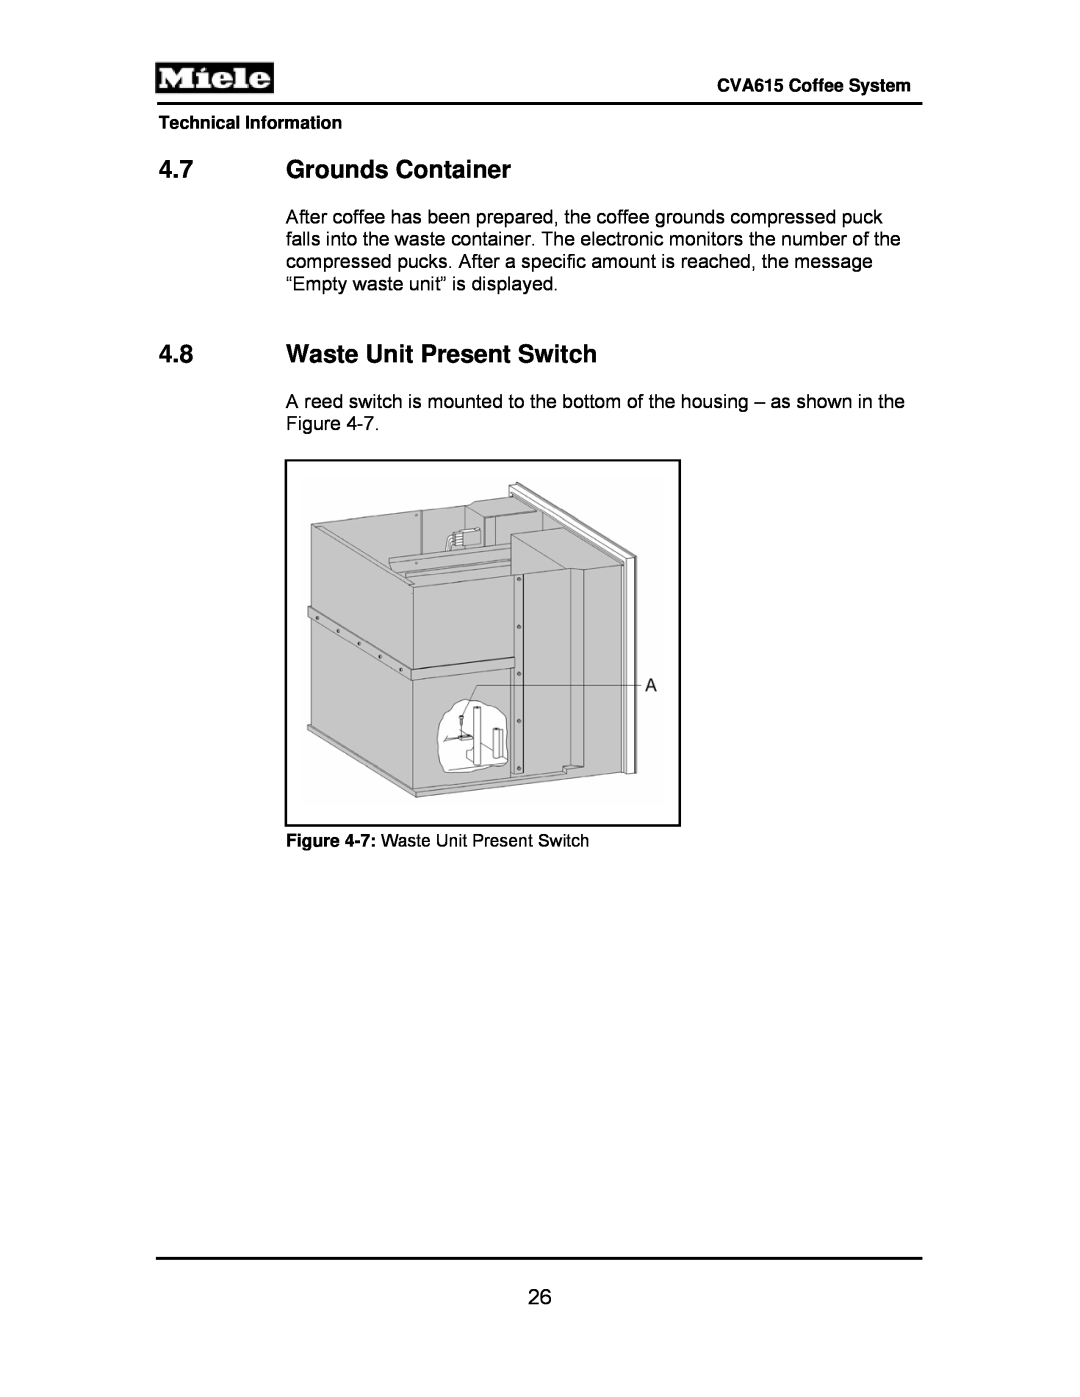 Miele CVA615 manual 4.7Grounds Container, 4.8Waste Unit Present Switch, 7: Waste Unit Present Switch 